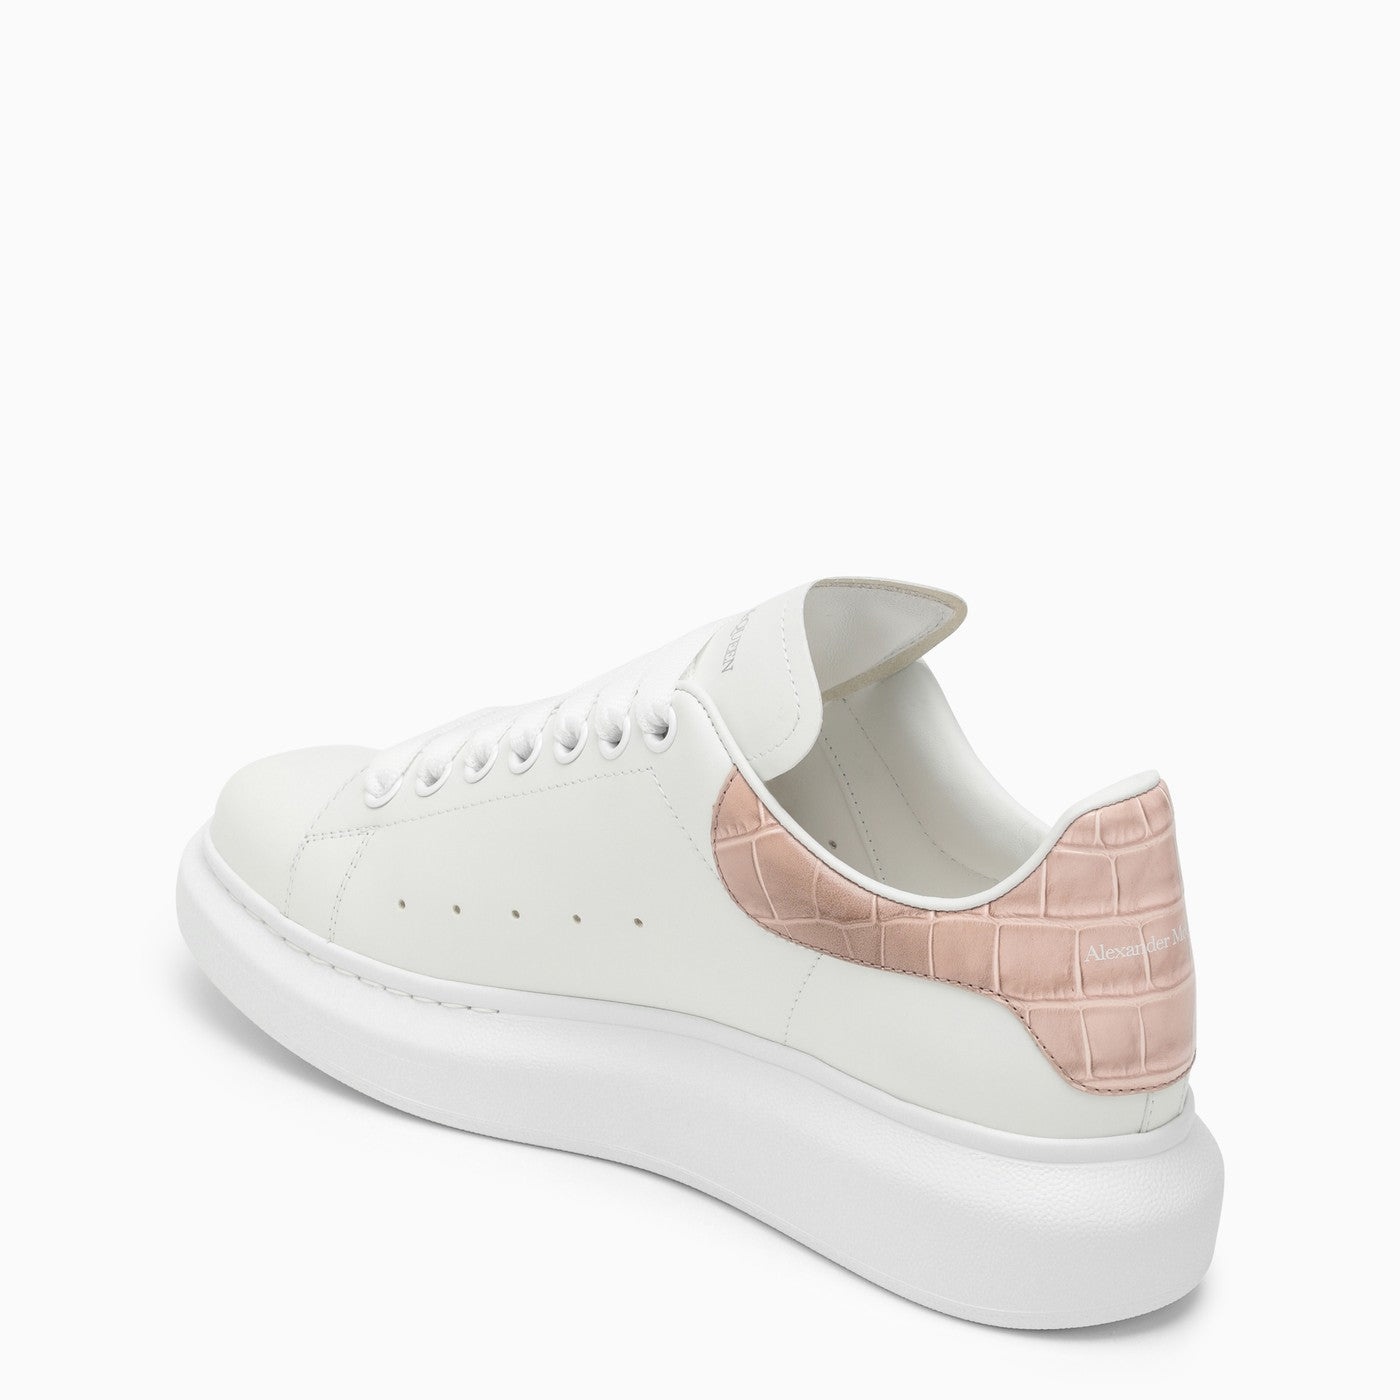 Alexander Mc Queen White And Clay Oversized Sneakers - 4